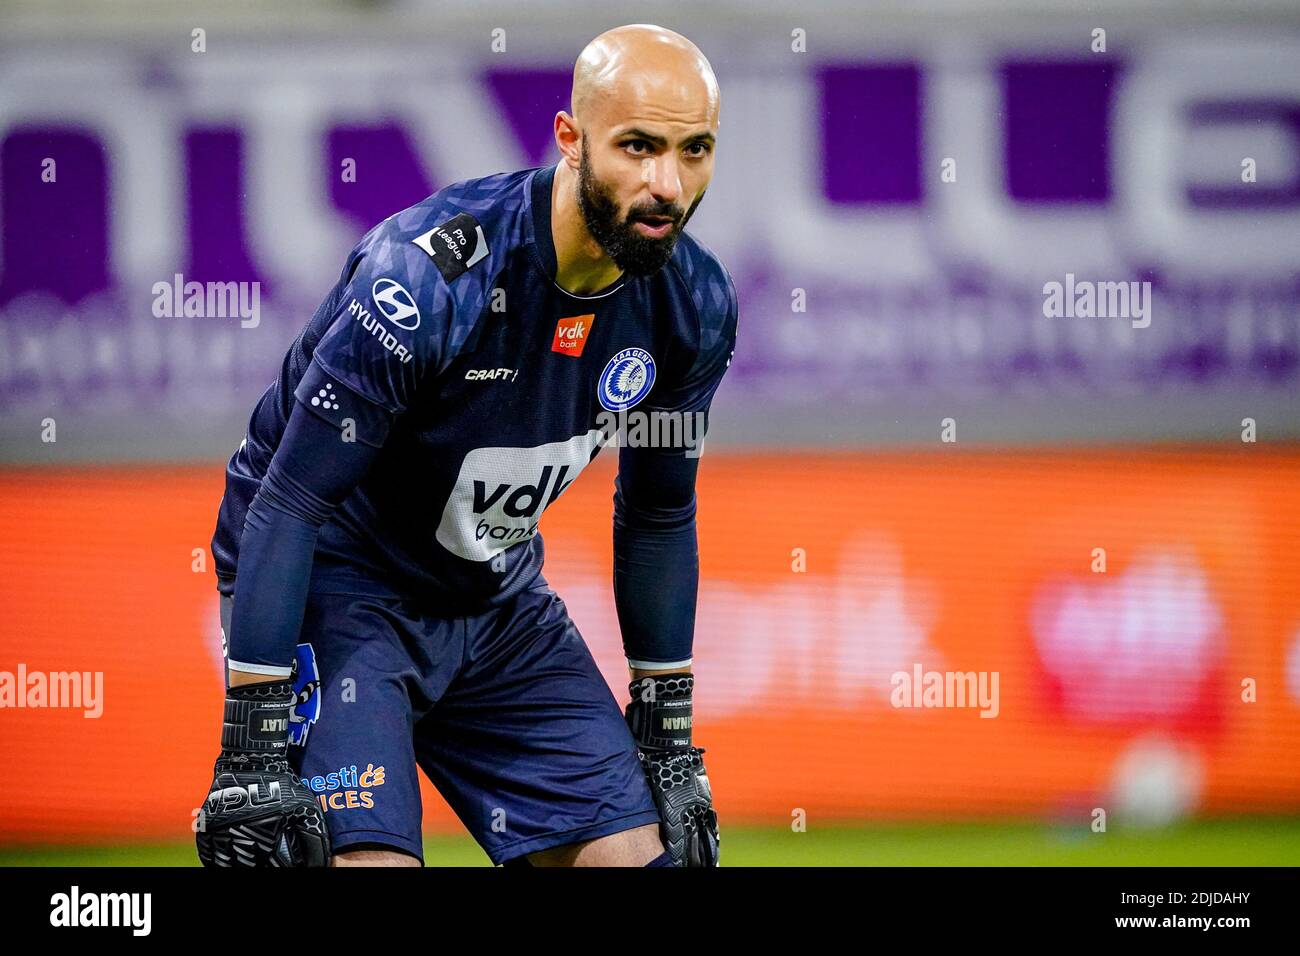 Antwerp Belgium December 13 Goalkeeper Sinan Bolat Of Kaa Gent During The Pro League Match Between Royal Antwerp Fc And Club Brugge At Bosuil Stad Stock Photo Alamy